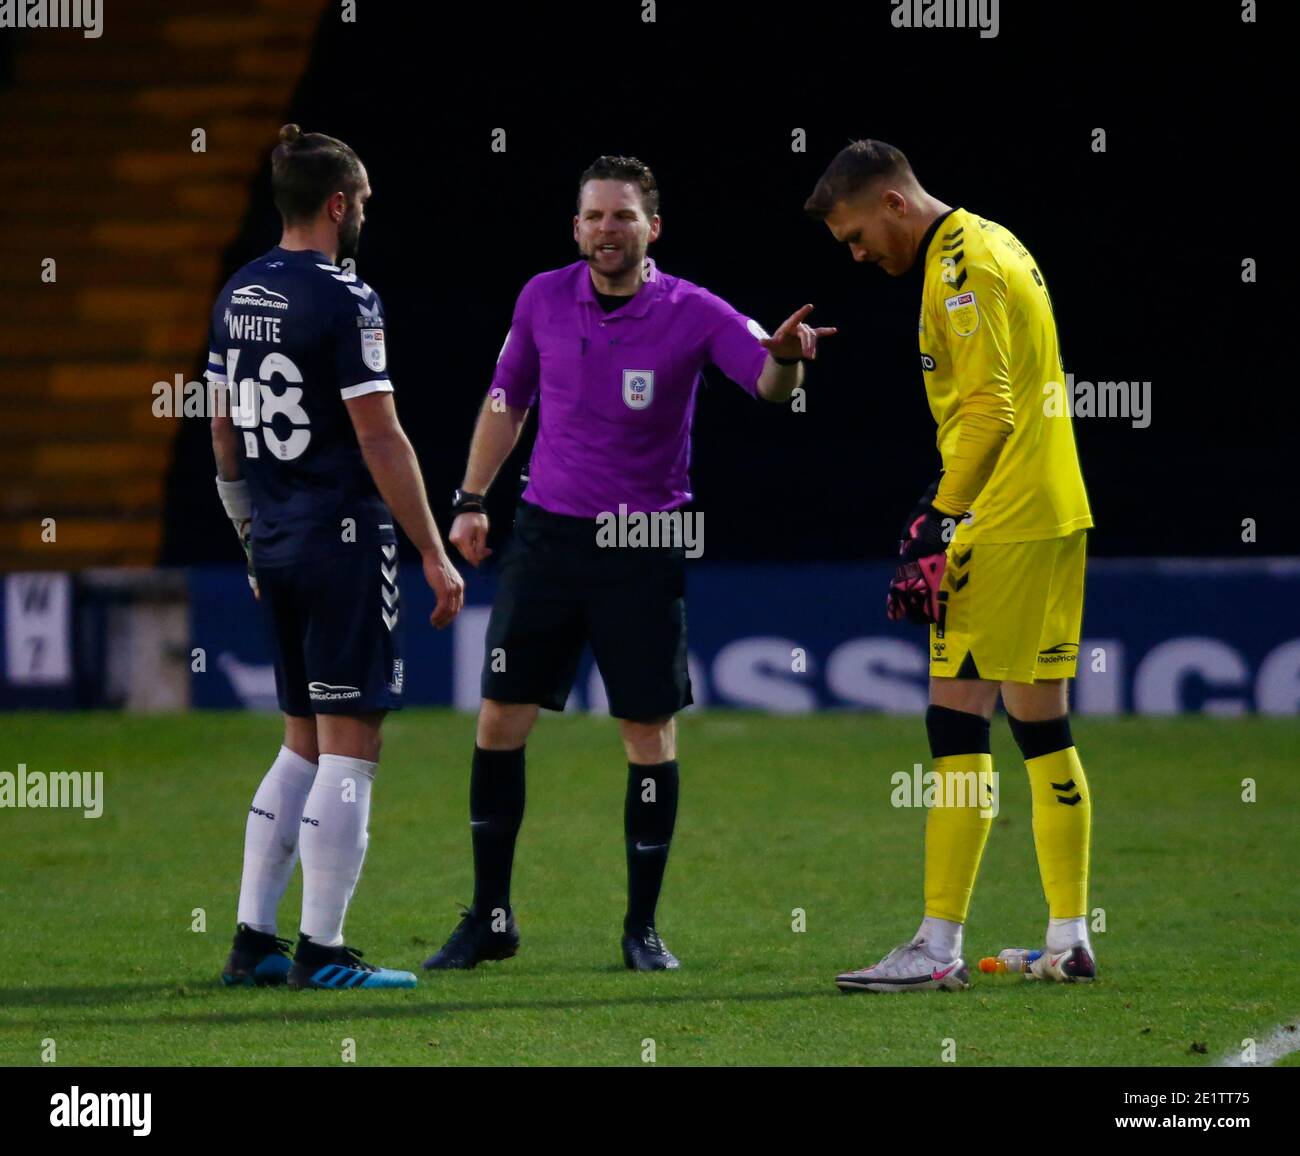 Southend, UK. 09th Jan, 2021. SOUTHEND, ENGLAND - JANUARY 09: Referee C Polland having a word with Mark Oxley of Southend United during Sky Bet League Two between Southend United and Barrow FC at Roots Hall Stadium, Southend, UK on 09th January 2021 Credit: Action Foto Sport/Alamy Live News Stock Photo